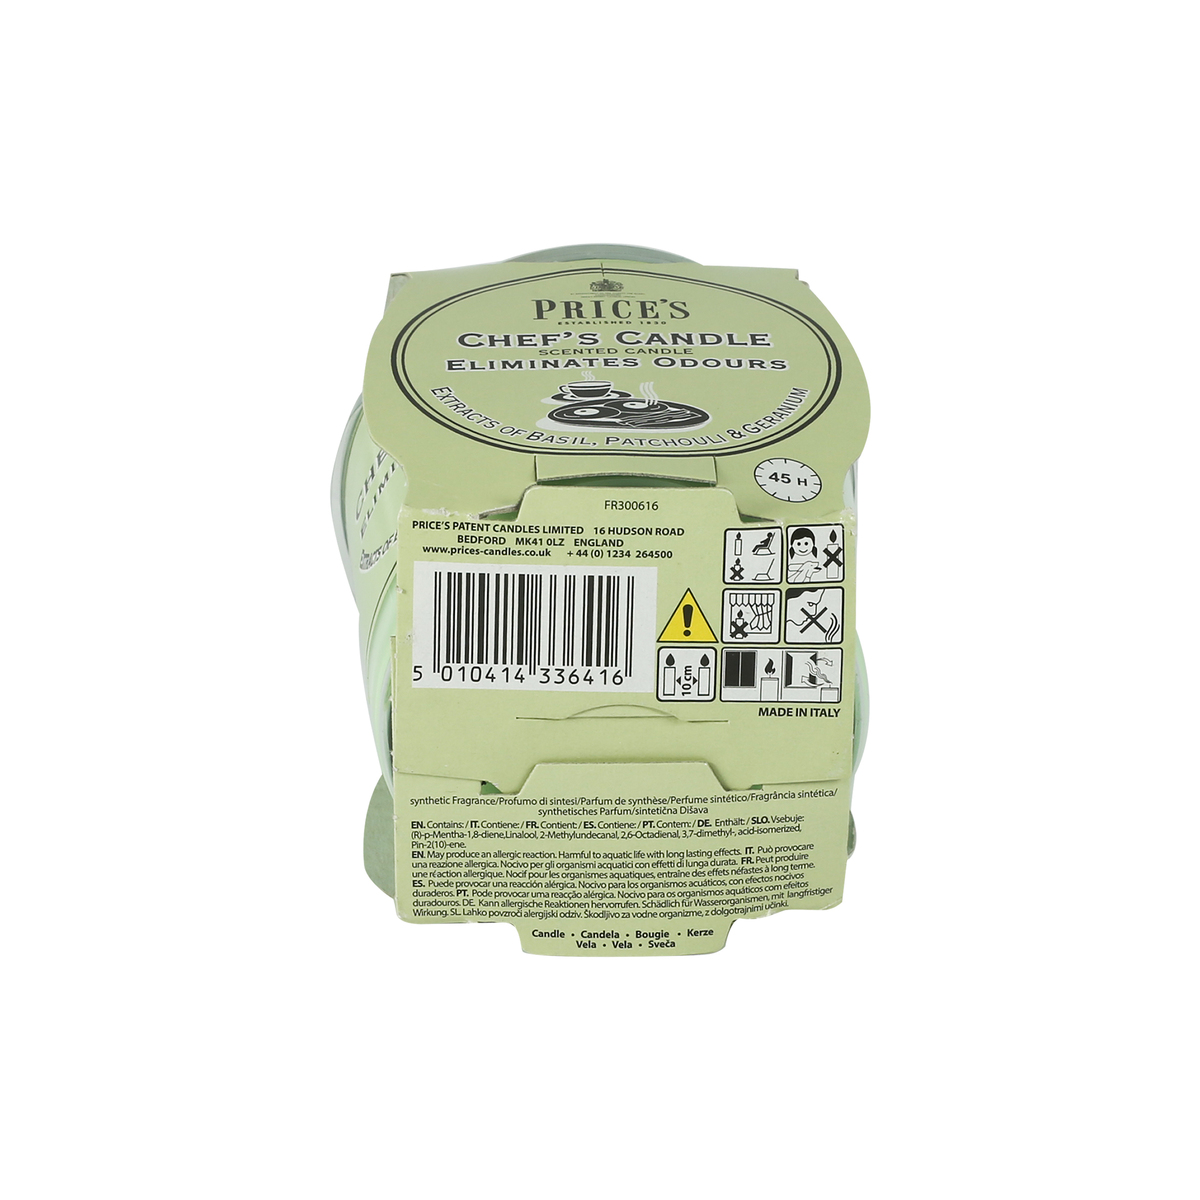 Prices Chef's Candle 170g